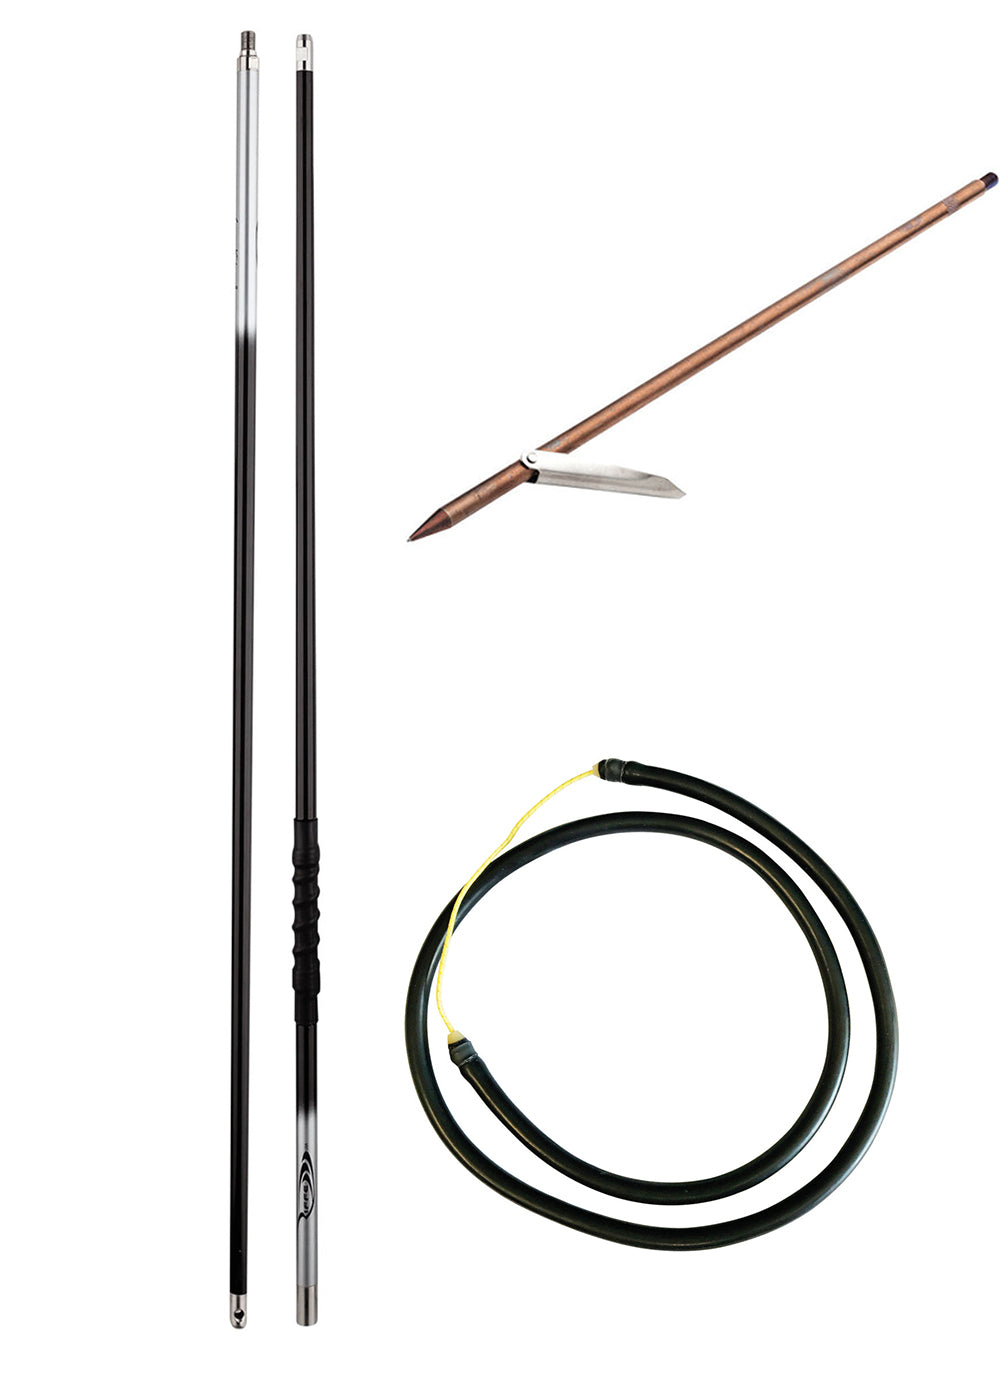 Riffe Carbon Fiber Pole Spear Package - 6ft - Adreno - Ocean Outfitters